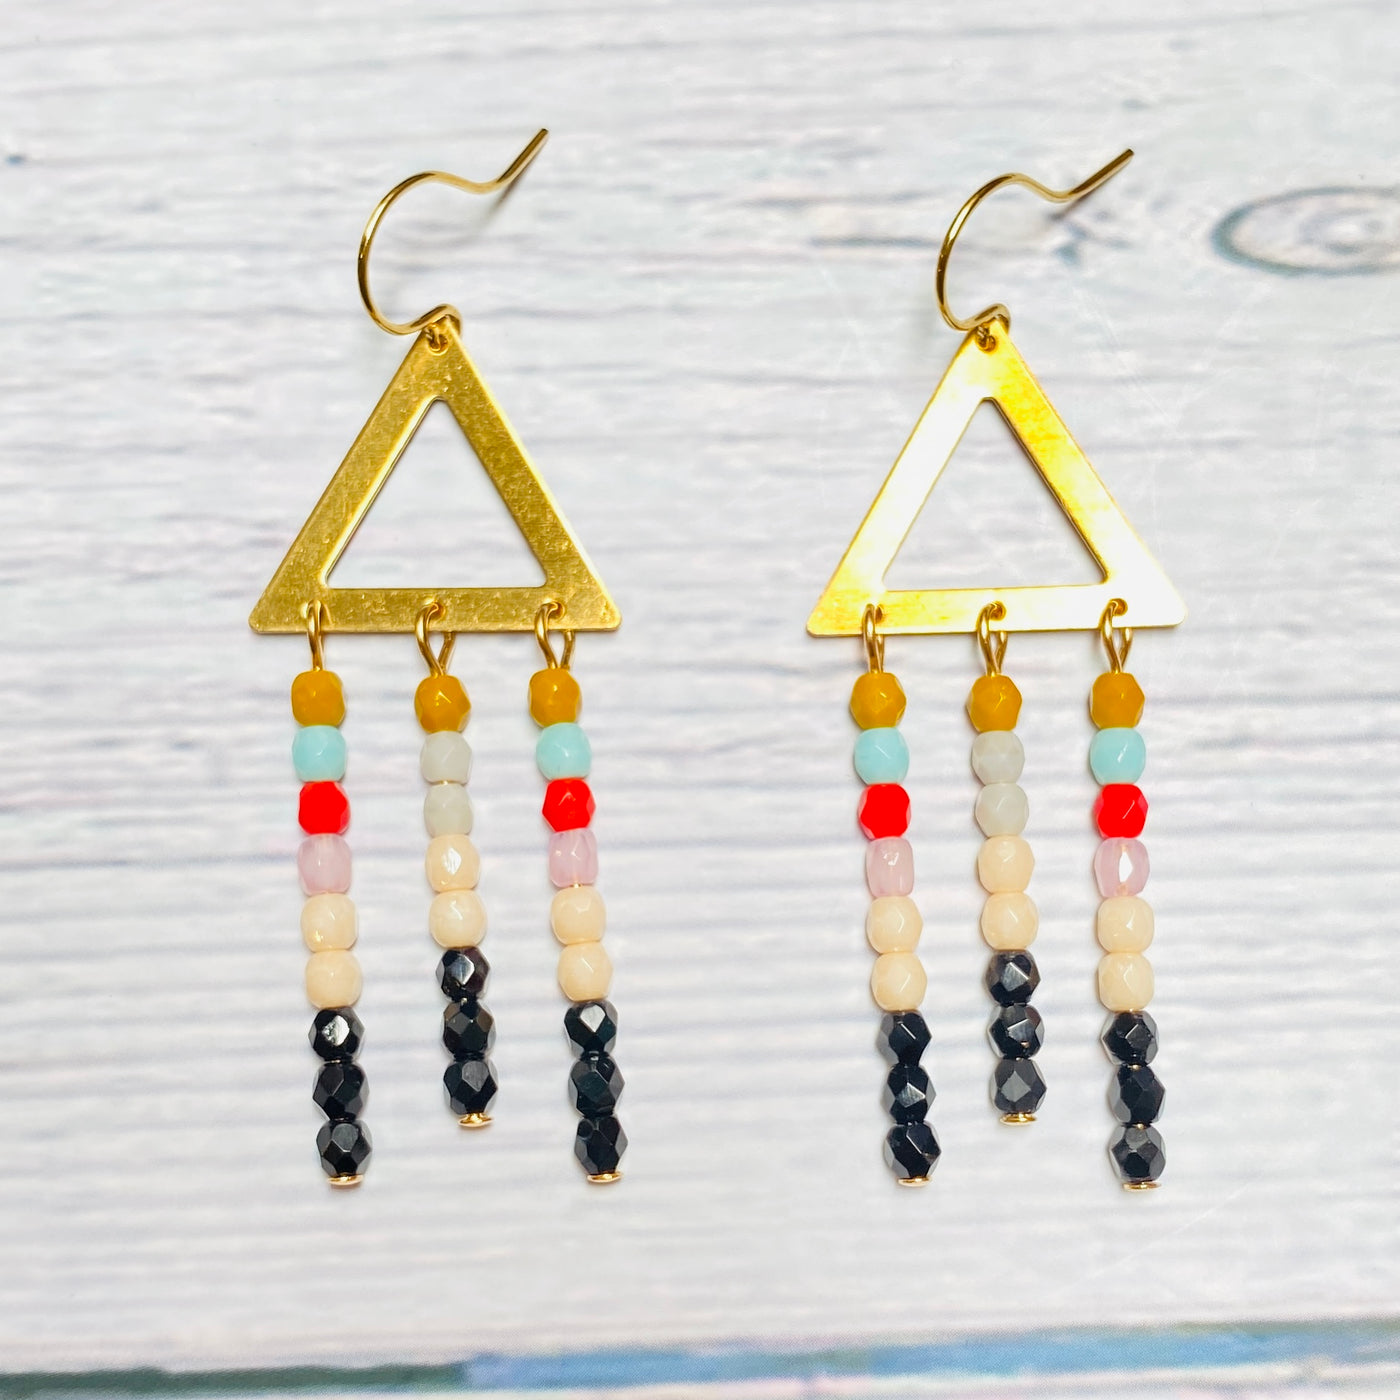 Gold plated brass triangle multicolored bead chandelier earrings.